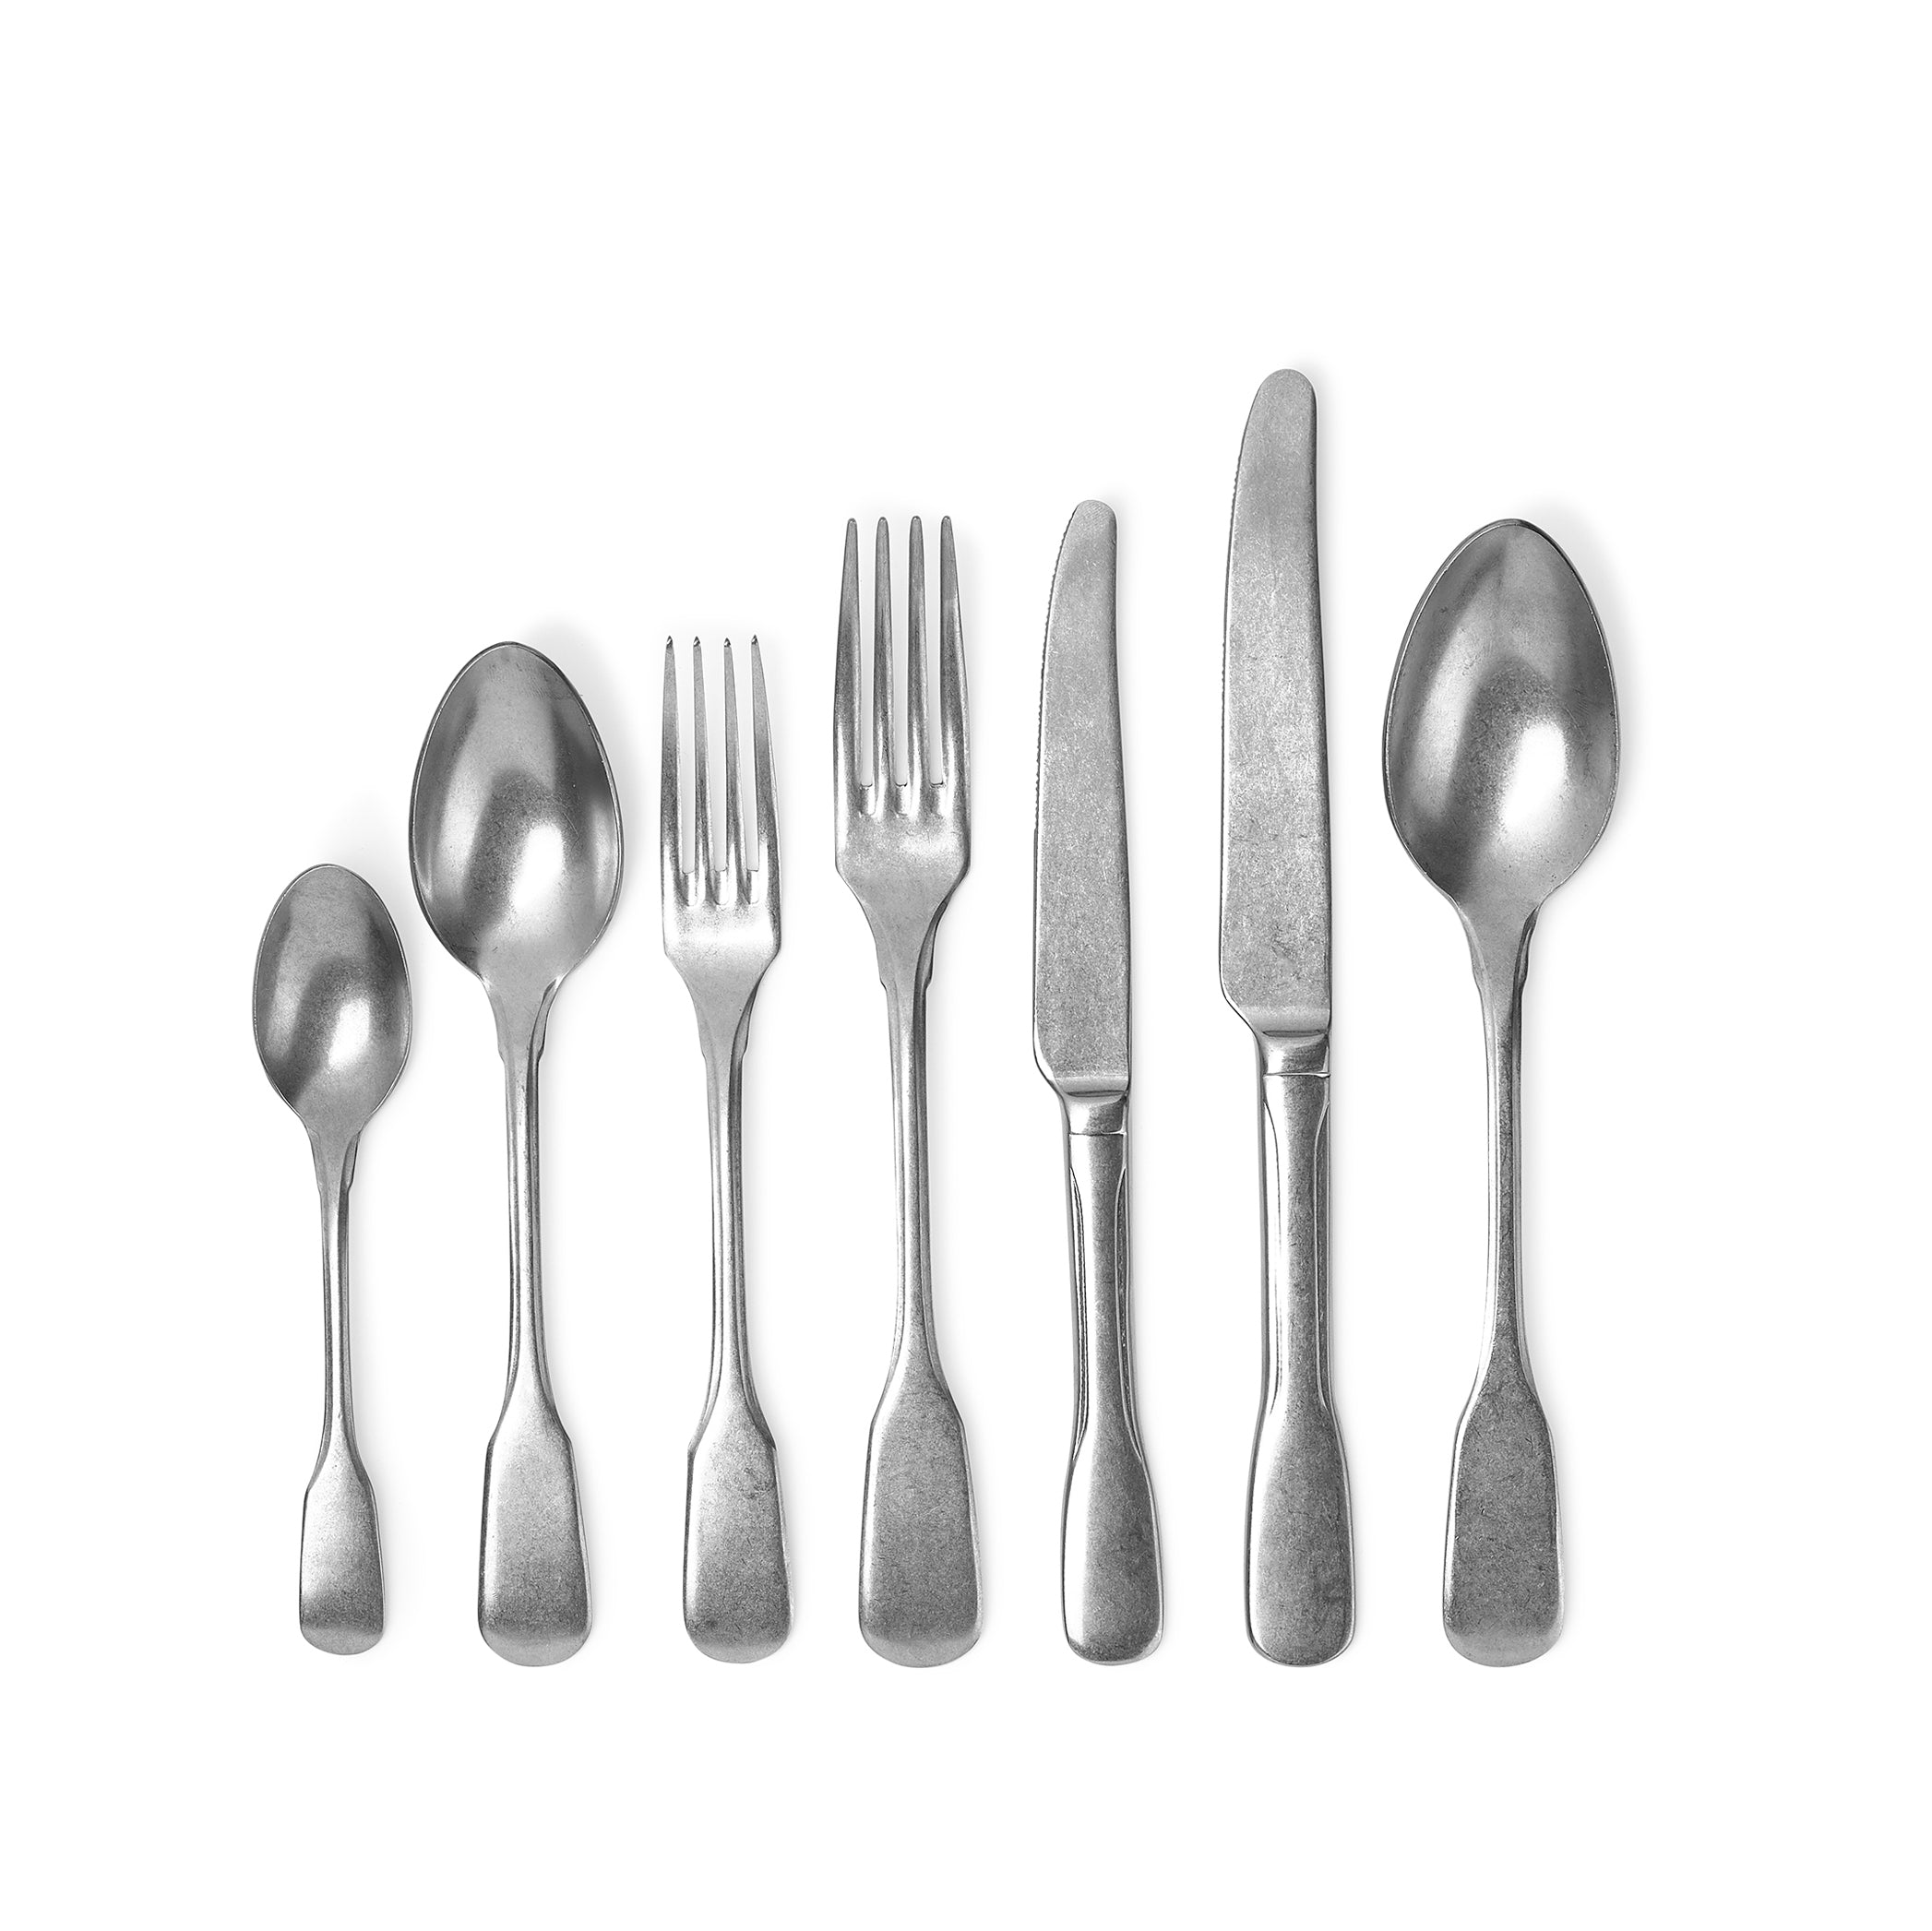 S&B 7 Piece Cutlery Set in Stainless Steel